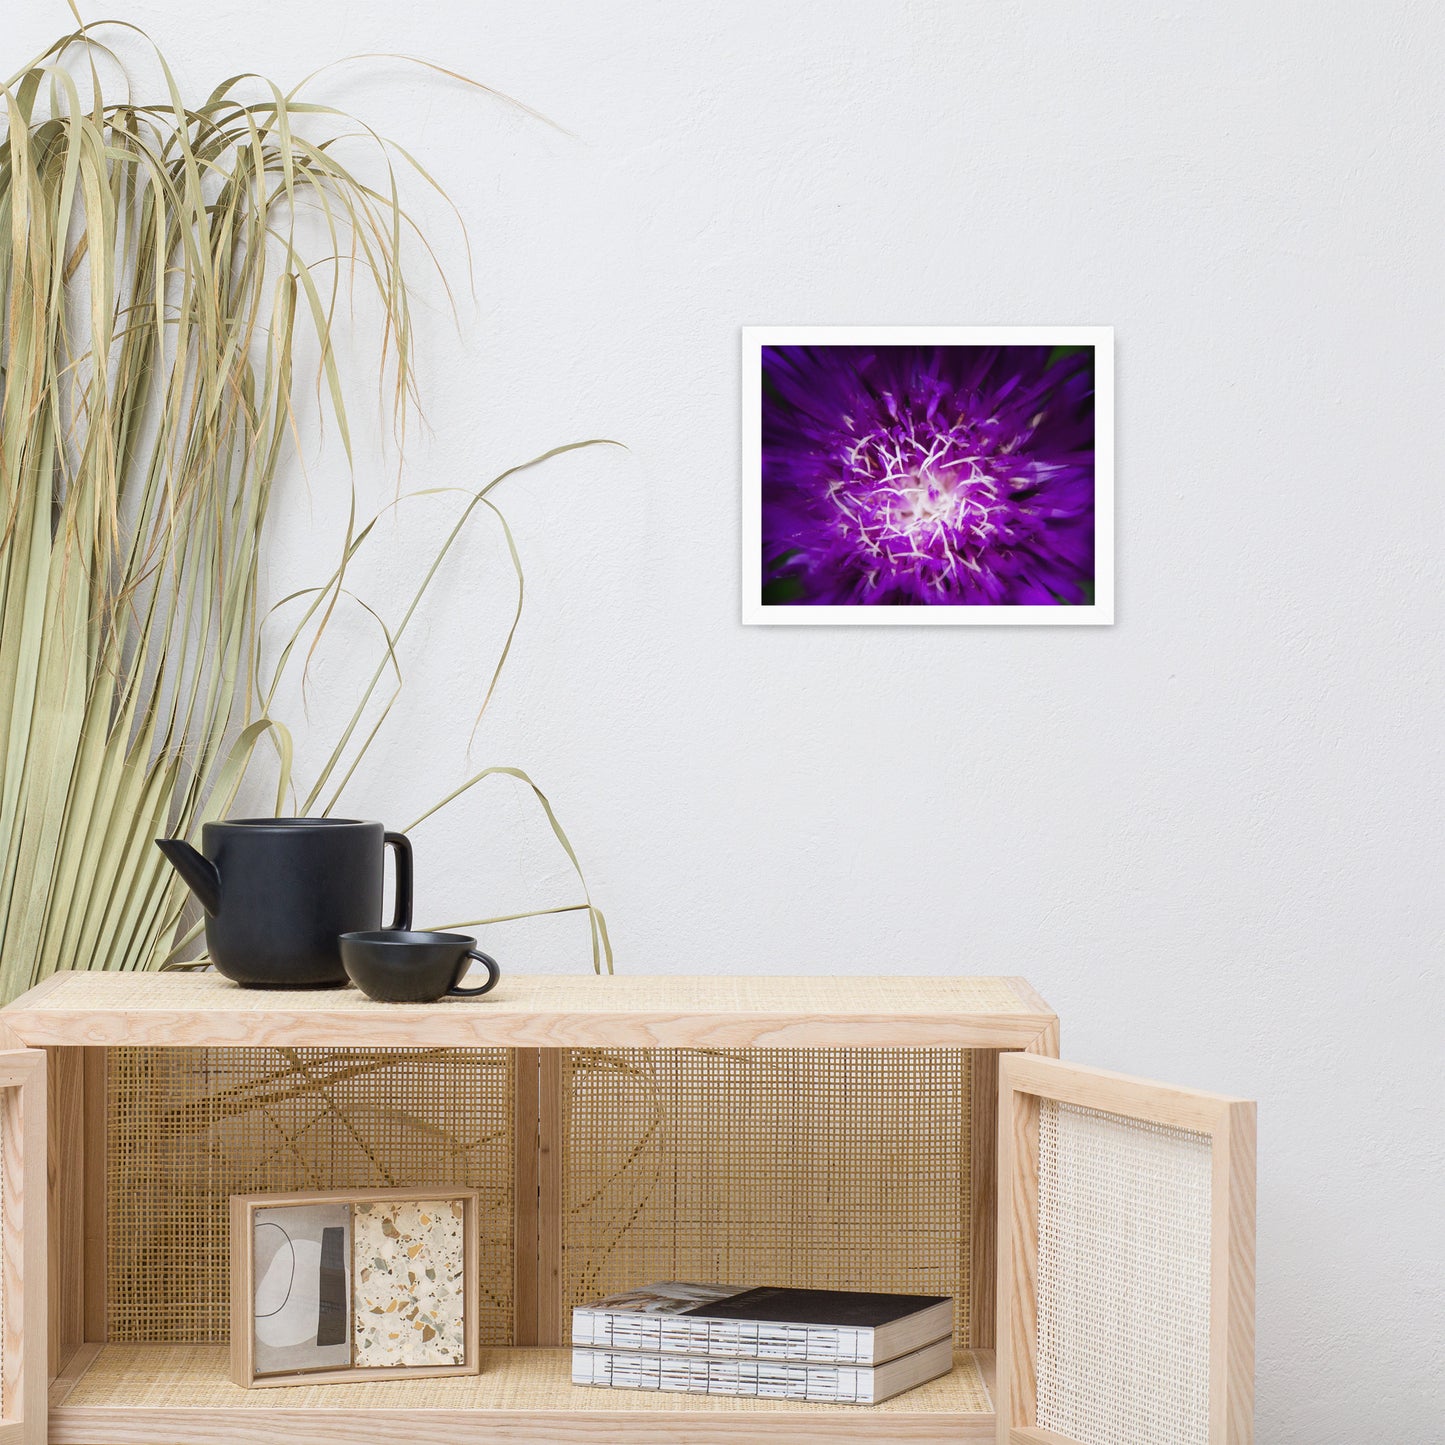 White Framed Pictures For Living Room: Purple Abstract Flower - Botanical / Floral / Flora / Flowers / Nature Photograph Framed Wall Art Print - Artwork - Wall Decor